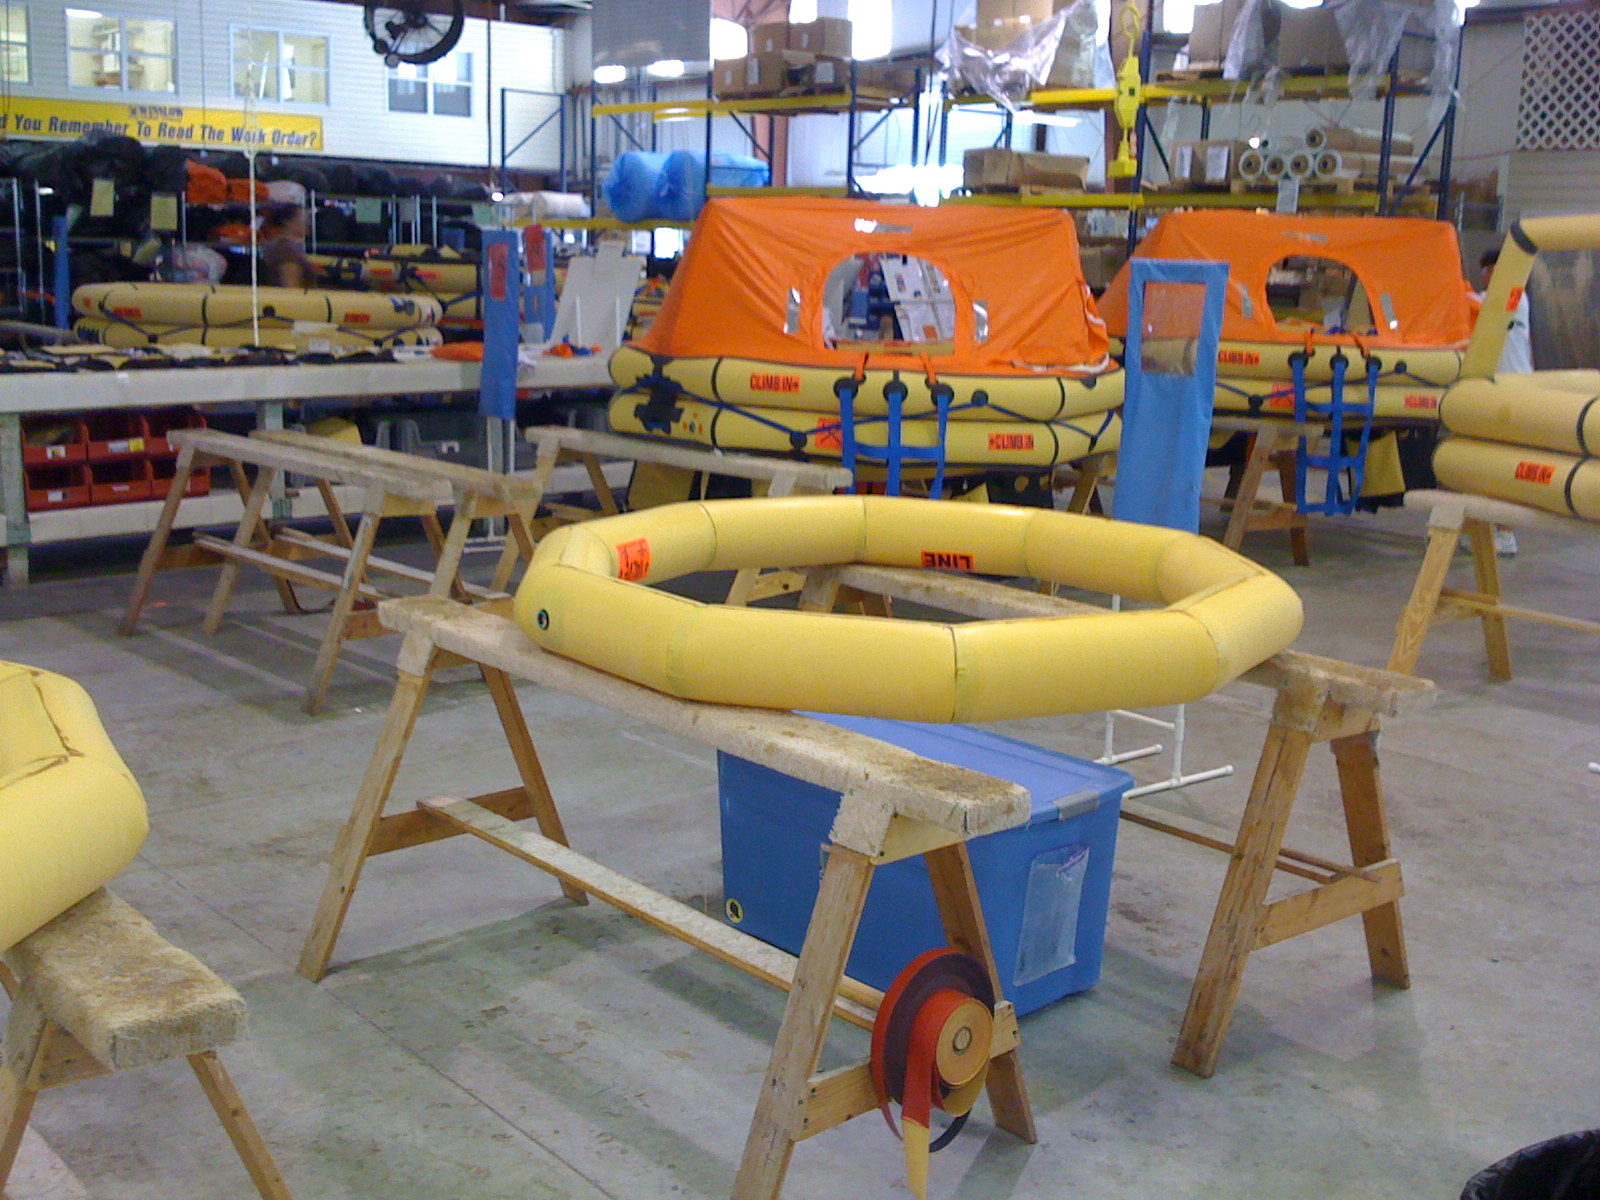 The first stage of a raft construction...tube number 1.